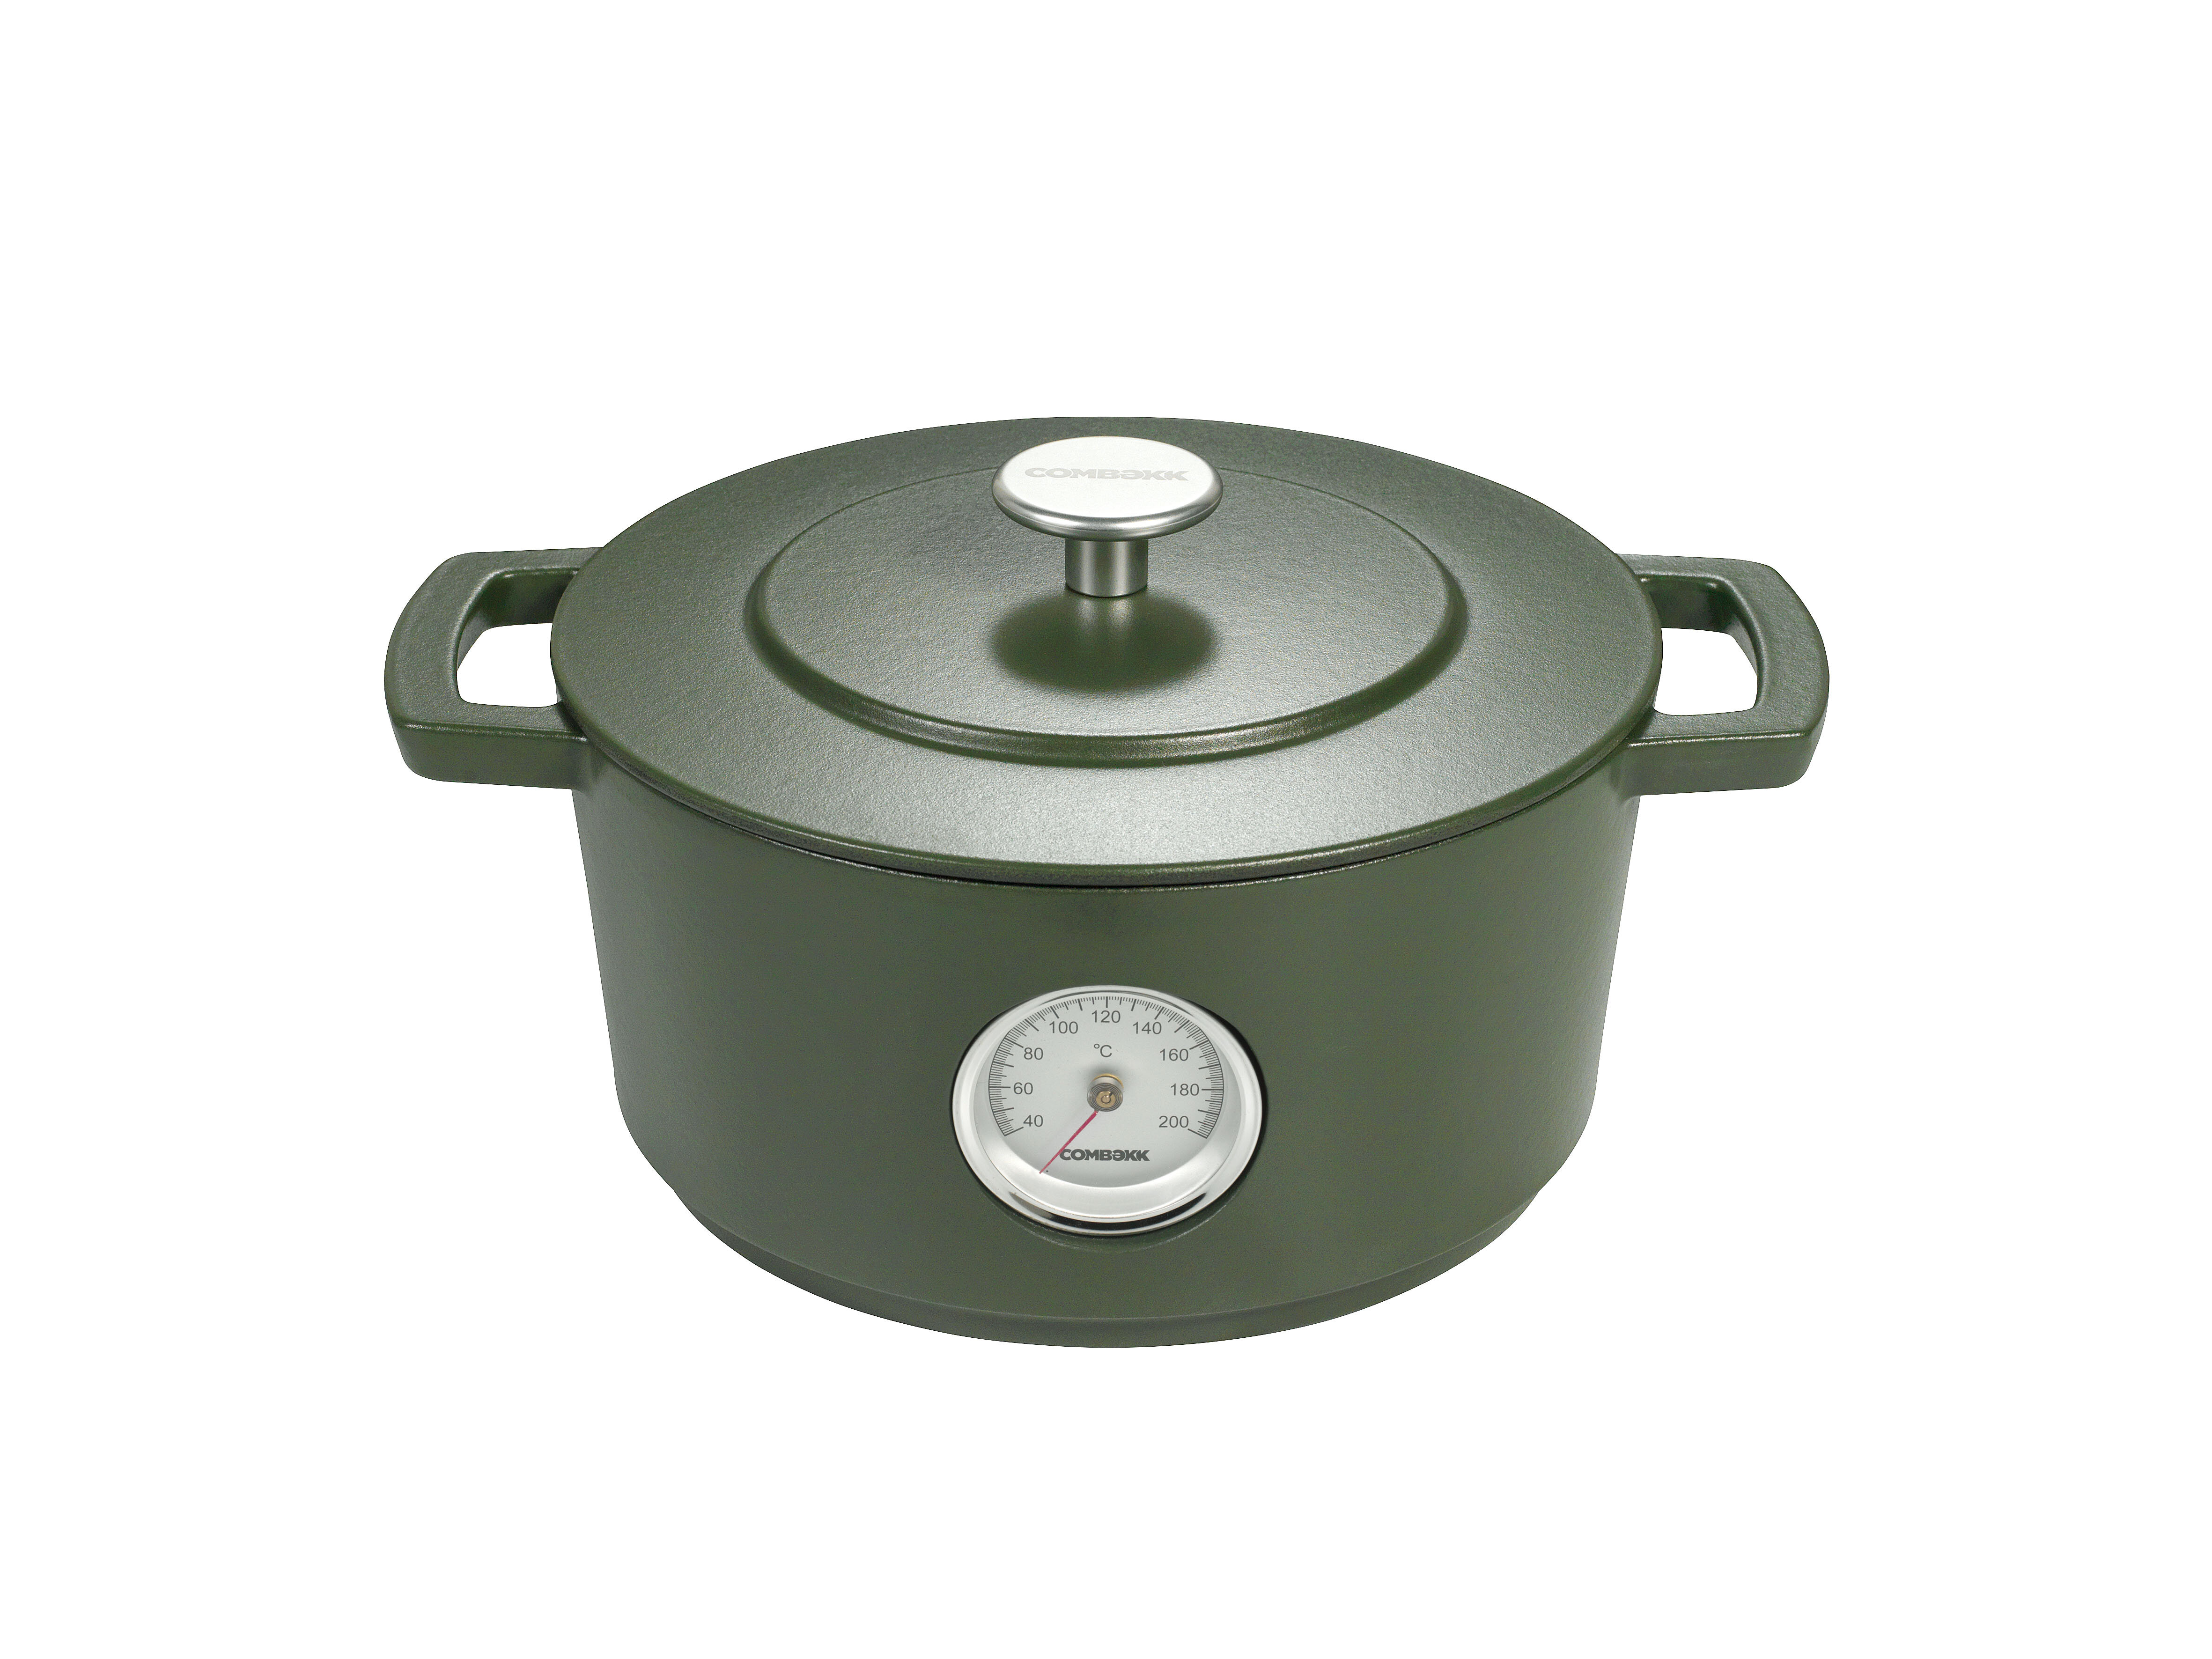 Bruntmor Olive Green Enameled Cast Iron Dutch Oven With Handles